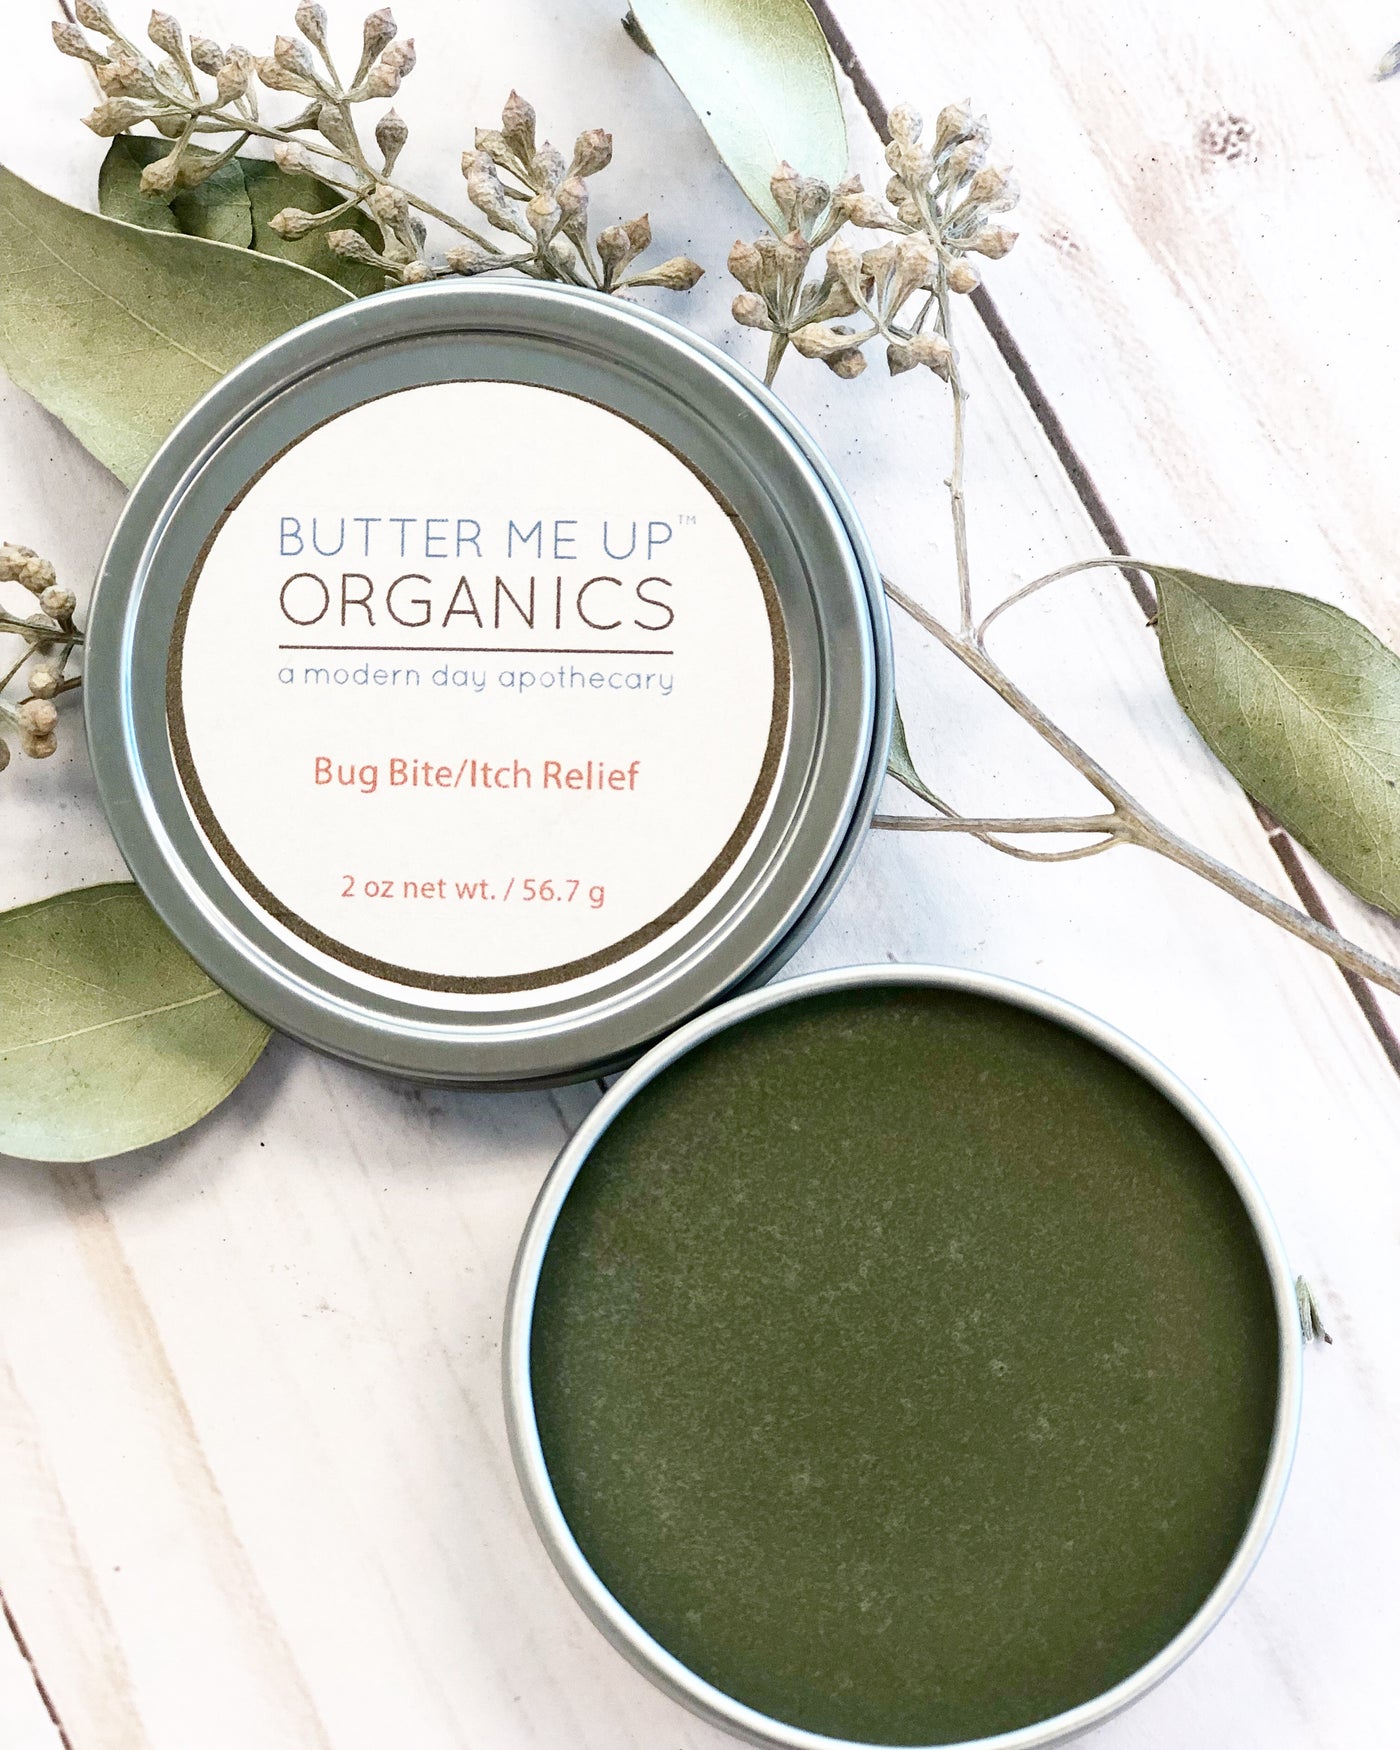 Organic Vegan Cruelty-Free Bug Bite, Anti Itch Cream - Roses & Chains | Fashionable Clothing, Shoes, Accessories, & More